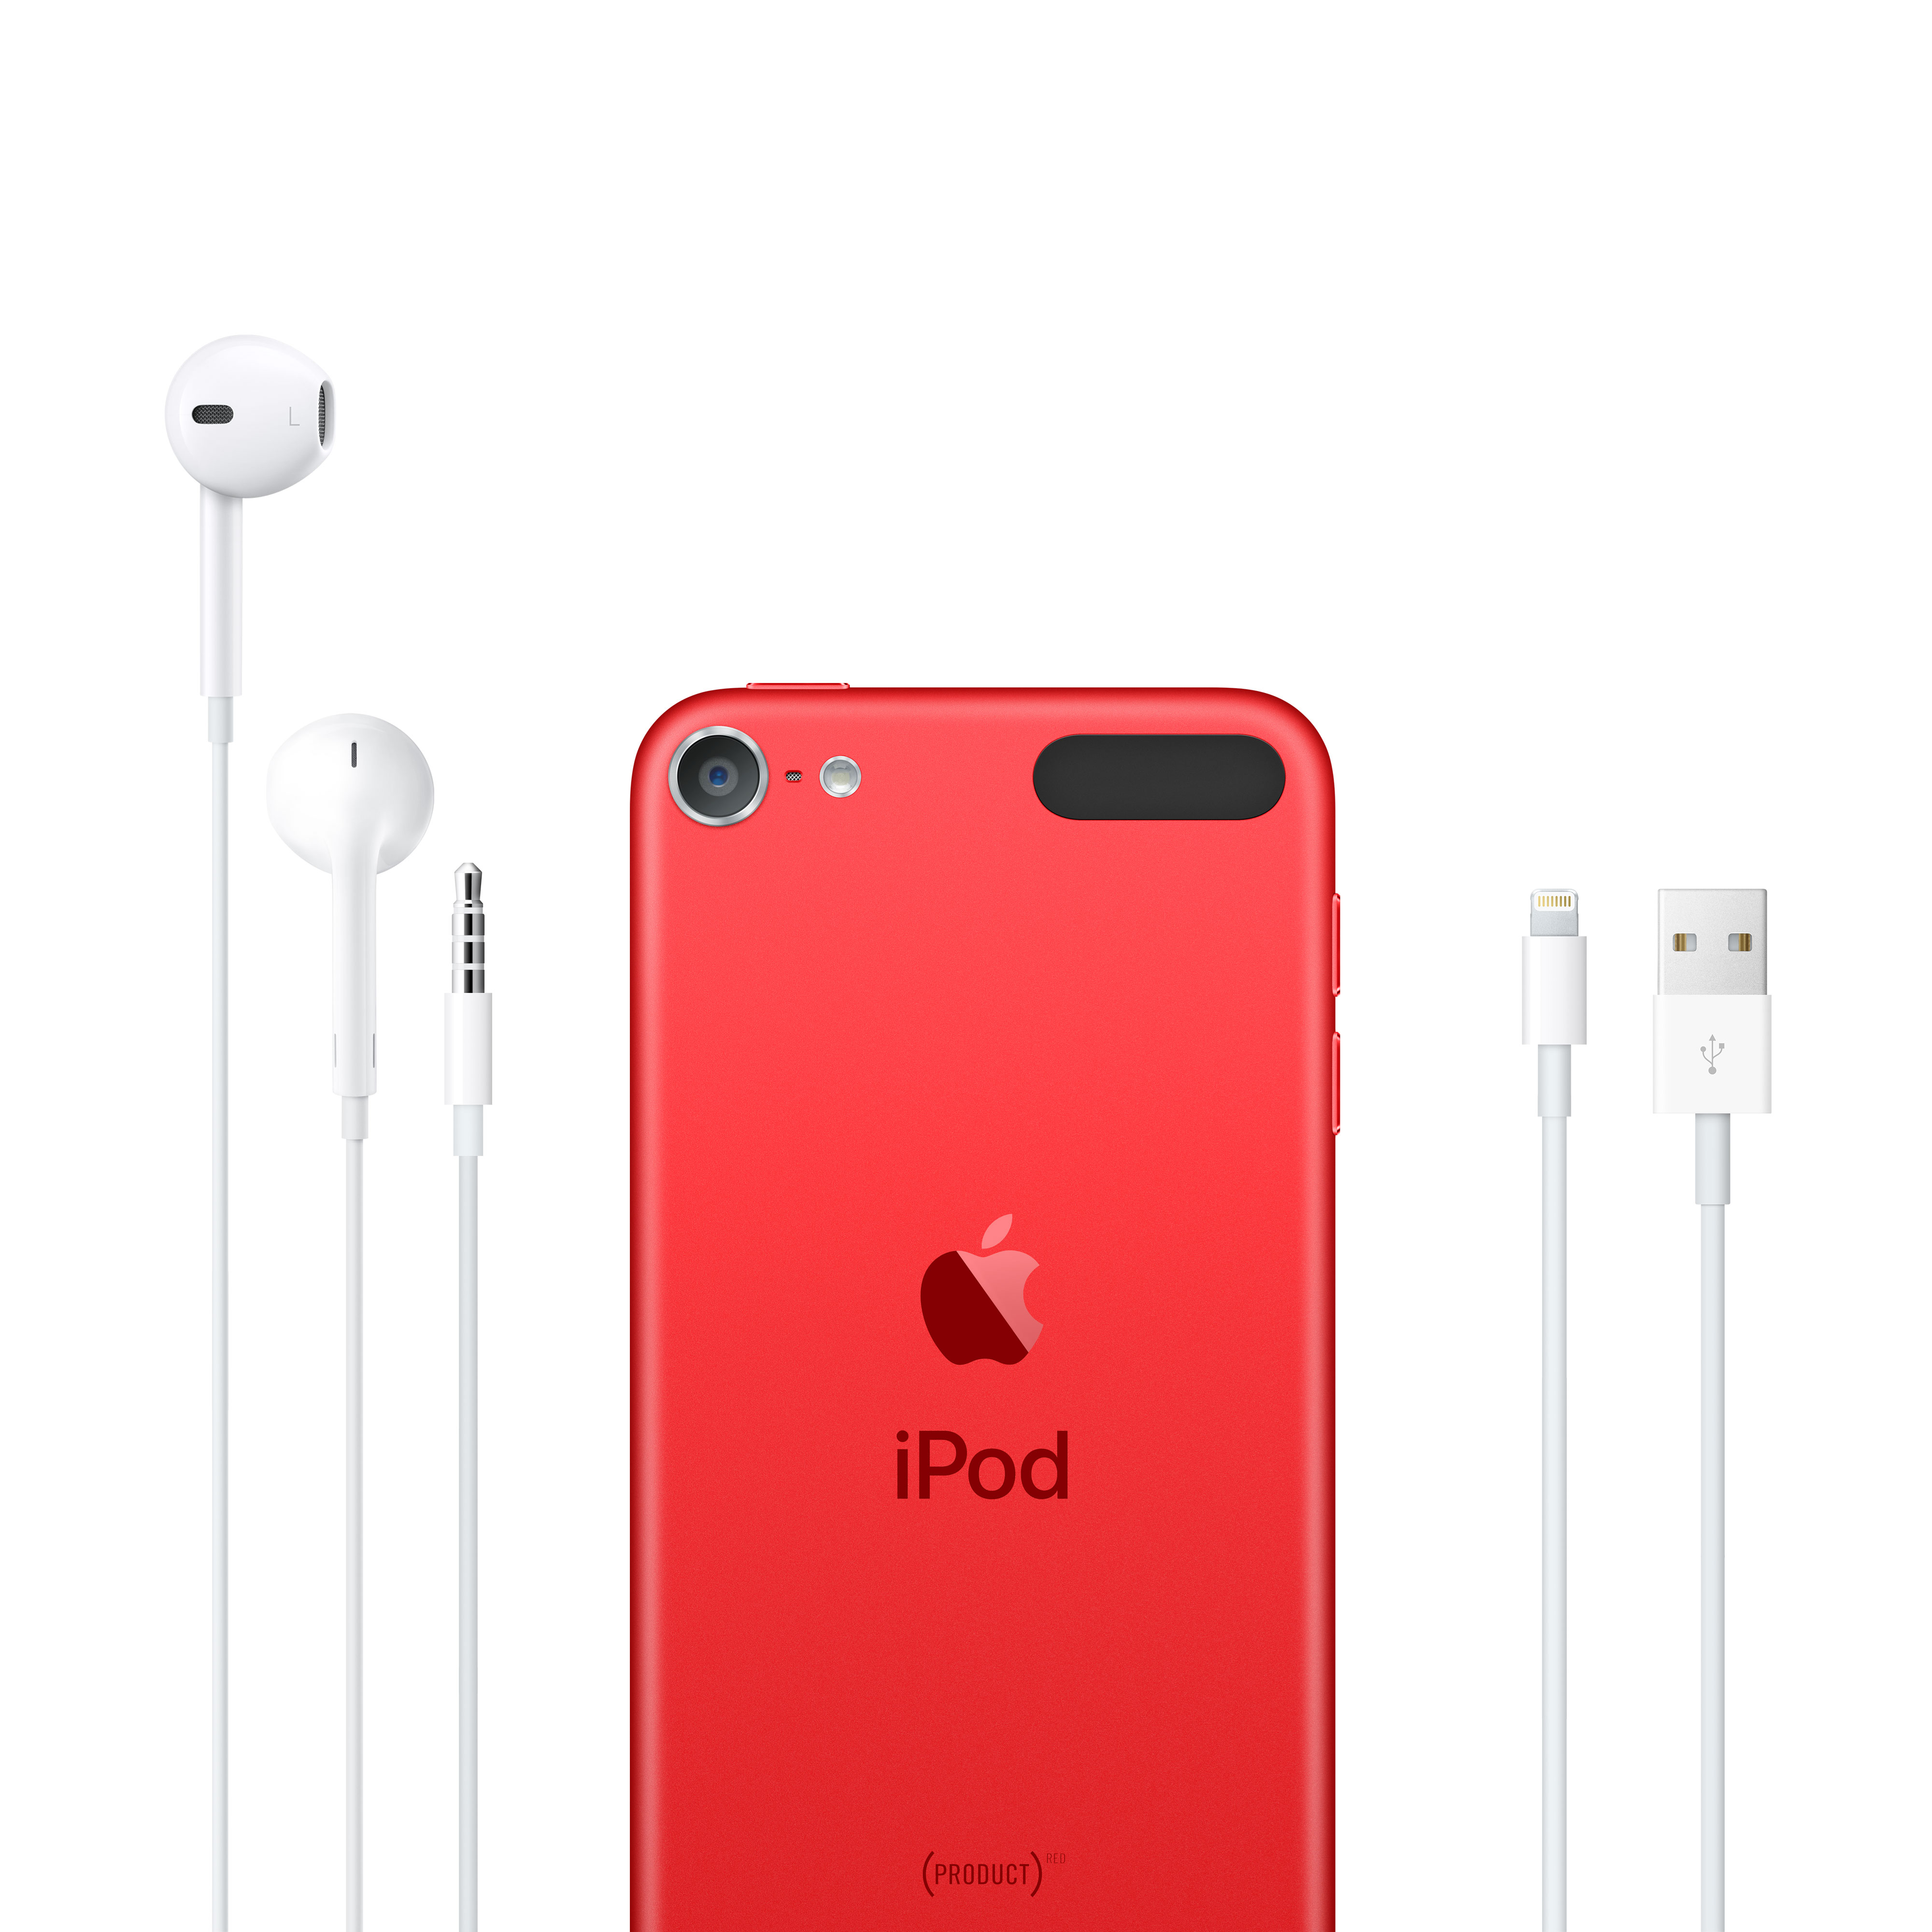 ｉpod touch 32ＧＢ アップル限定 product RED